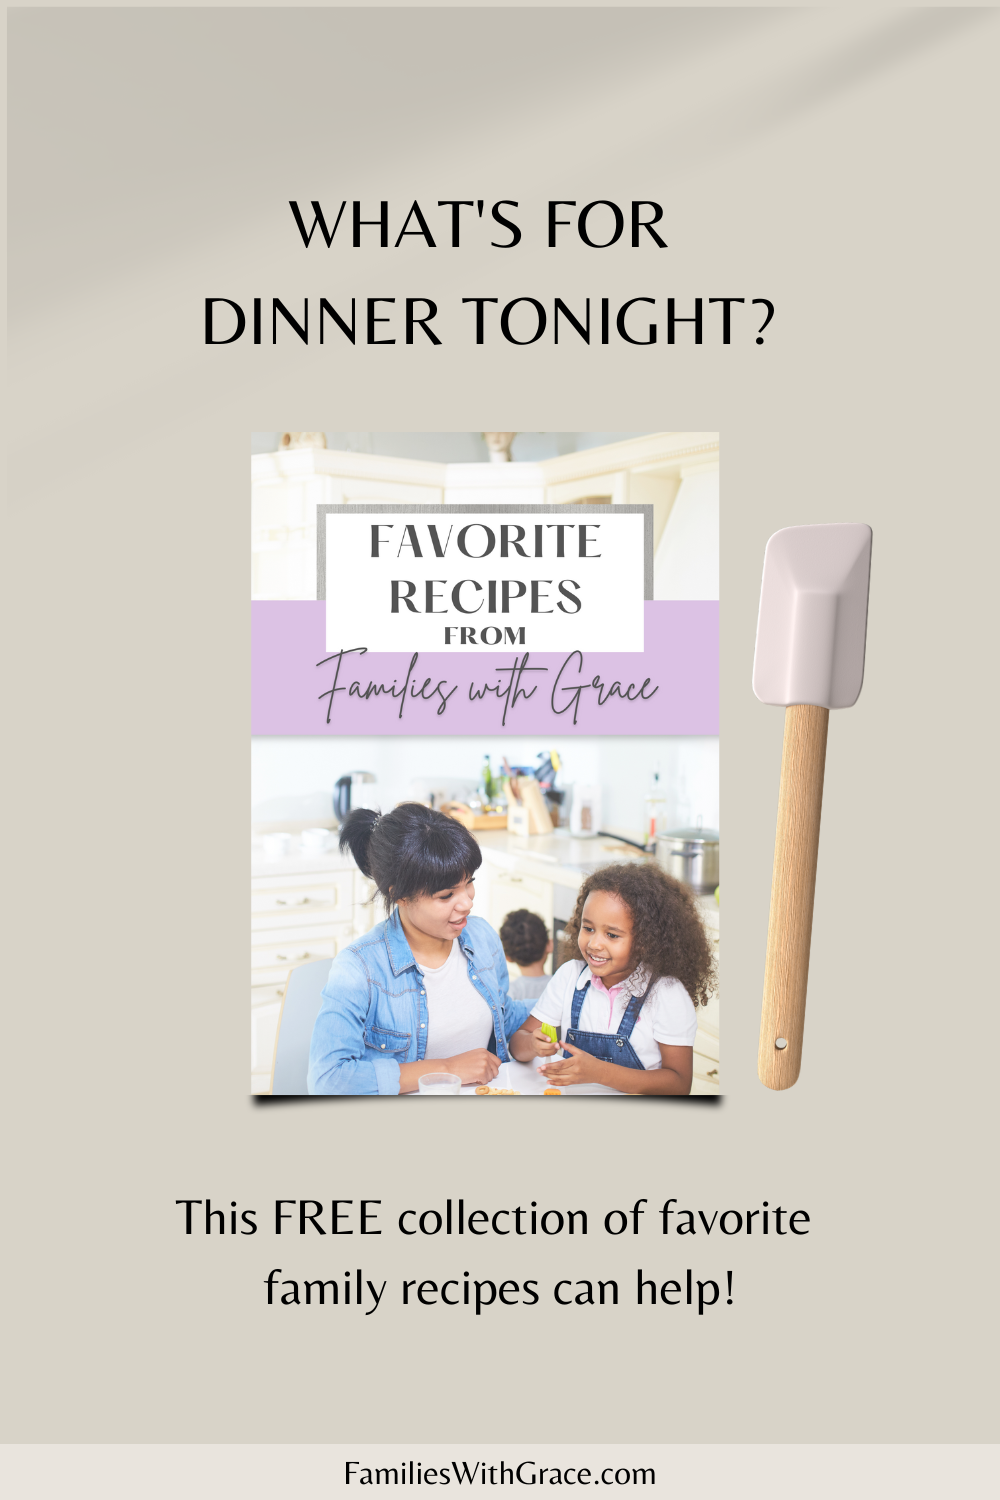 Favorite Recipes from Families with Grace